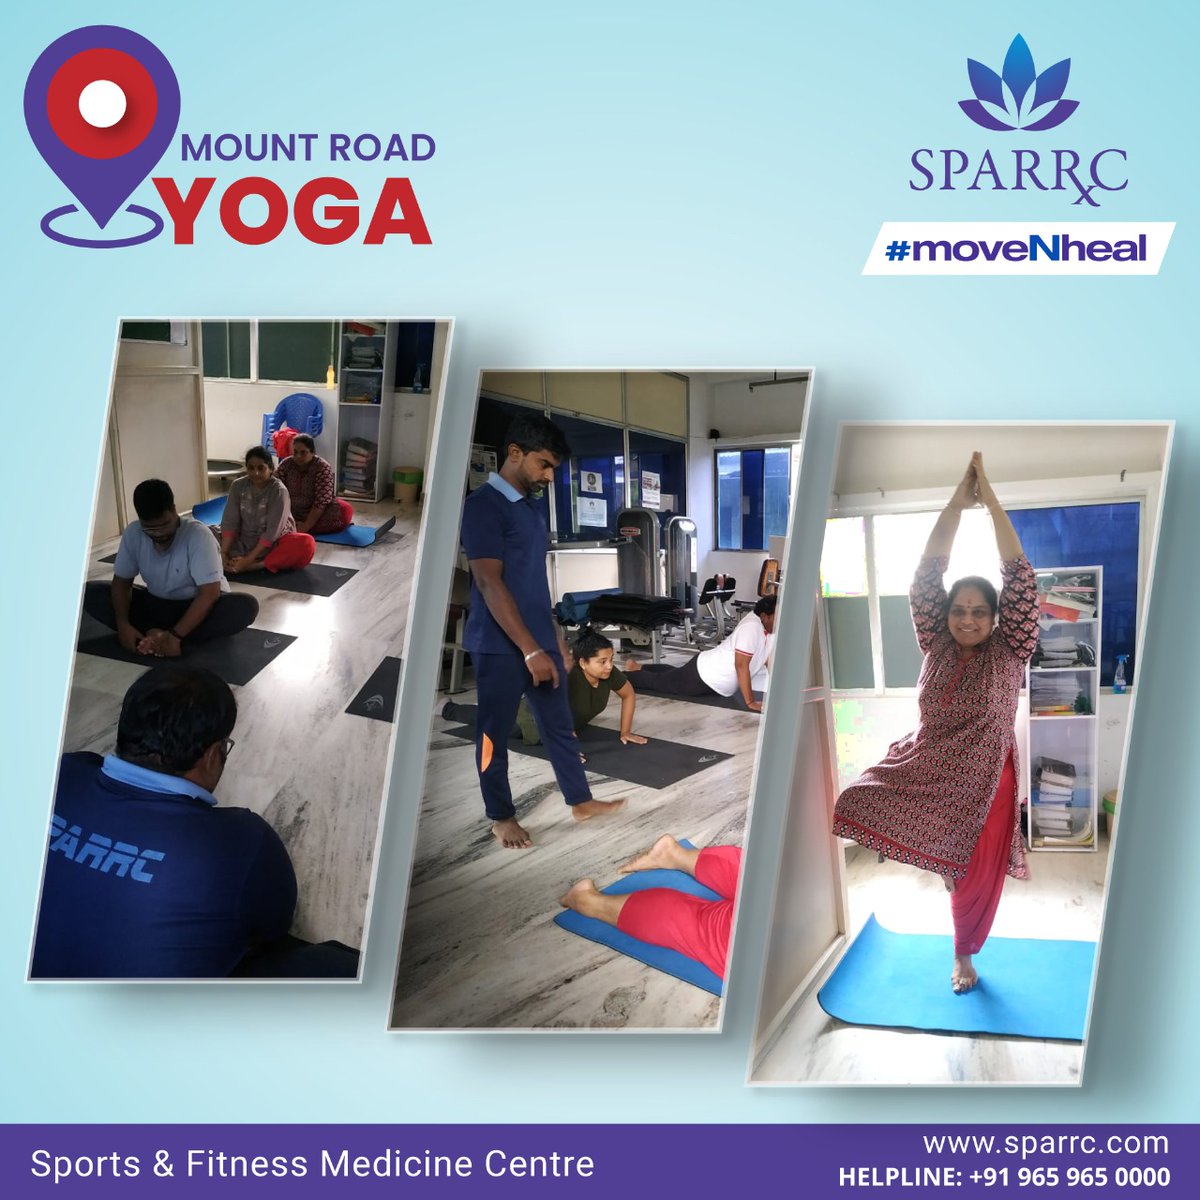 Fitness Mela @ SPARRC is going on in full swing with enthusiastic participation at all centres. Here is a glimpse of the activities at our various centres this past week.

#sparrc #fitness #moveNheal #fitnessmela #fitnessactivities #health #stayfit #fitnesscampaign #fitnesslife